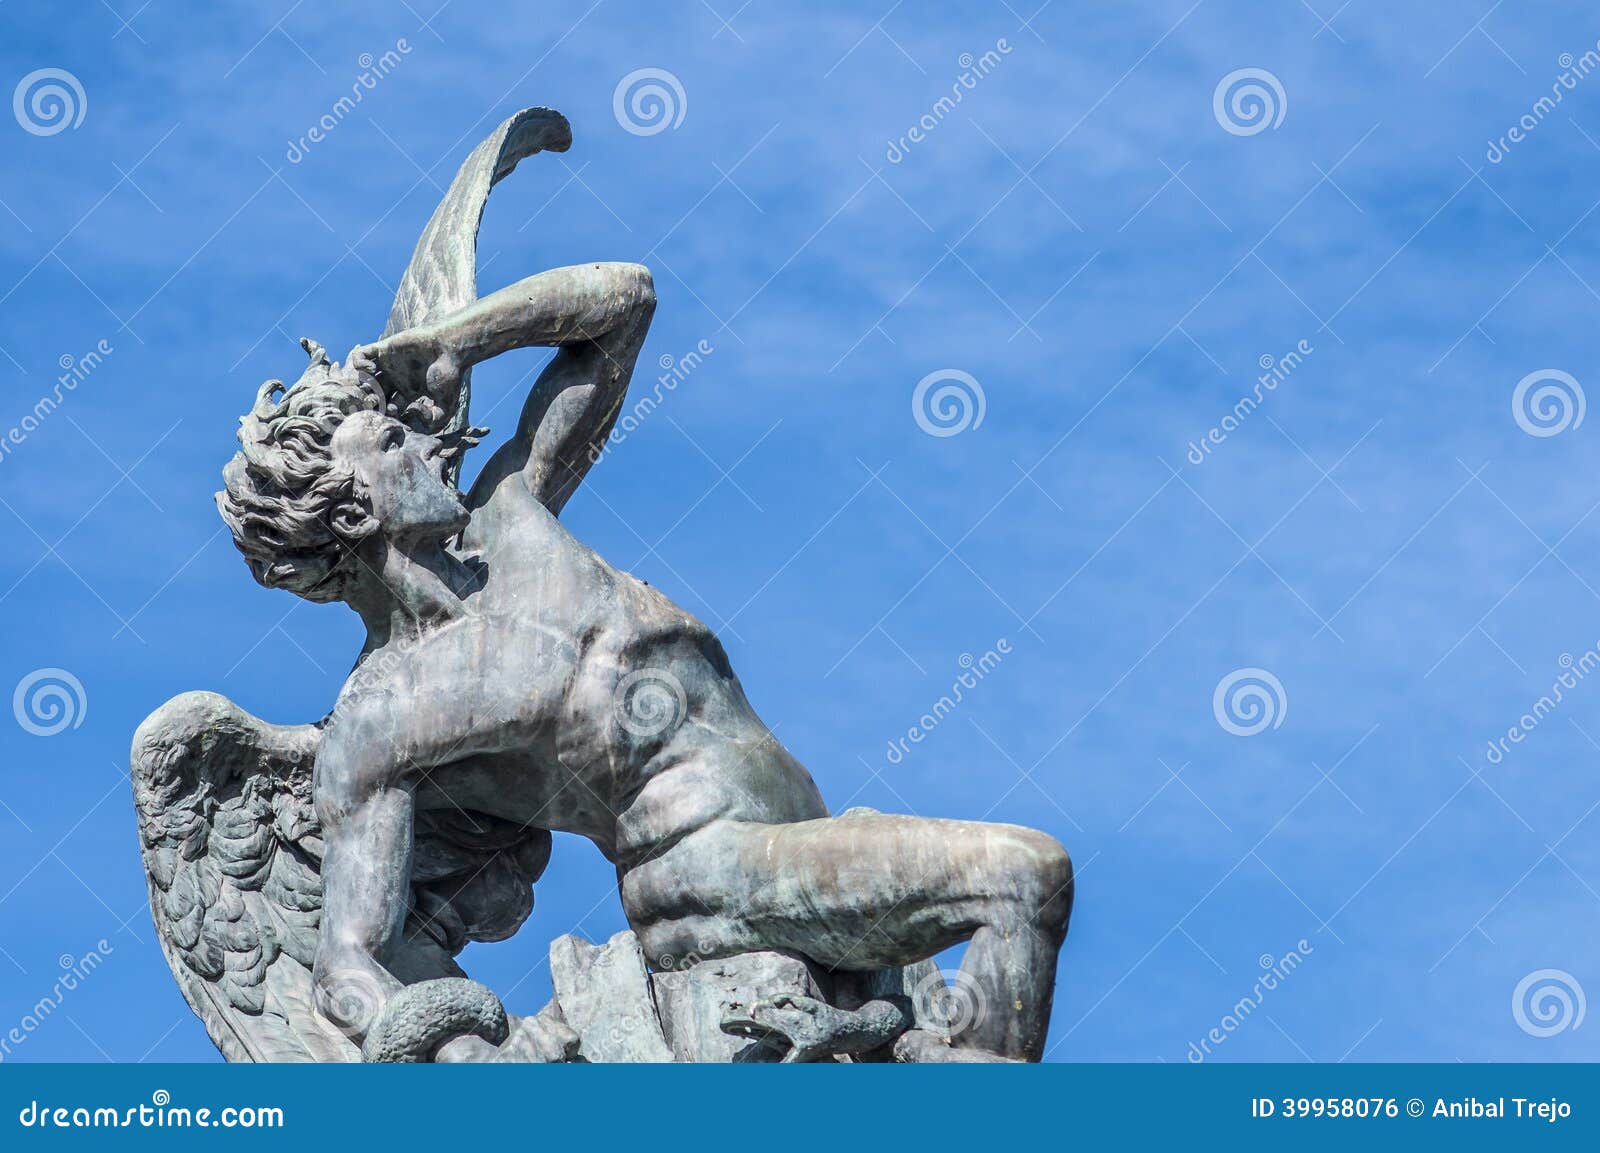 the fountain of the fallen angel in madrid, spain.